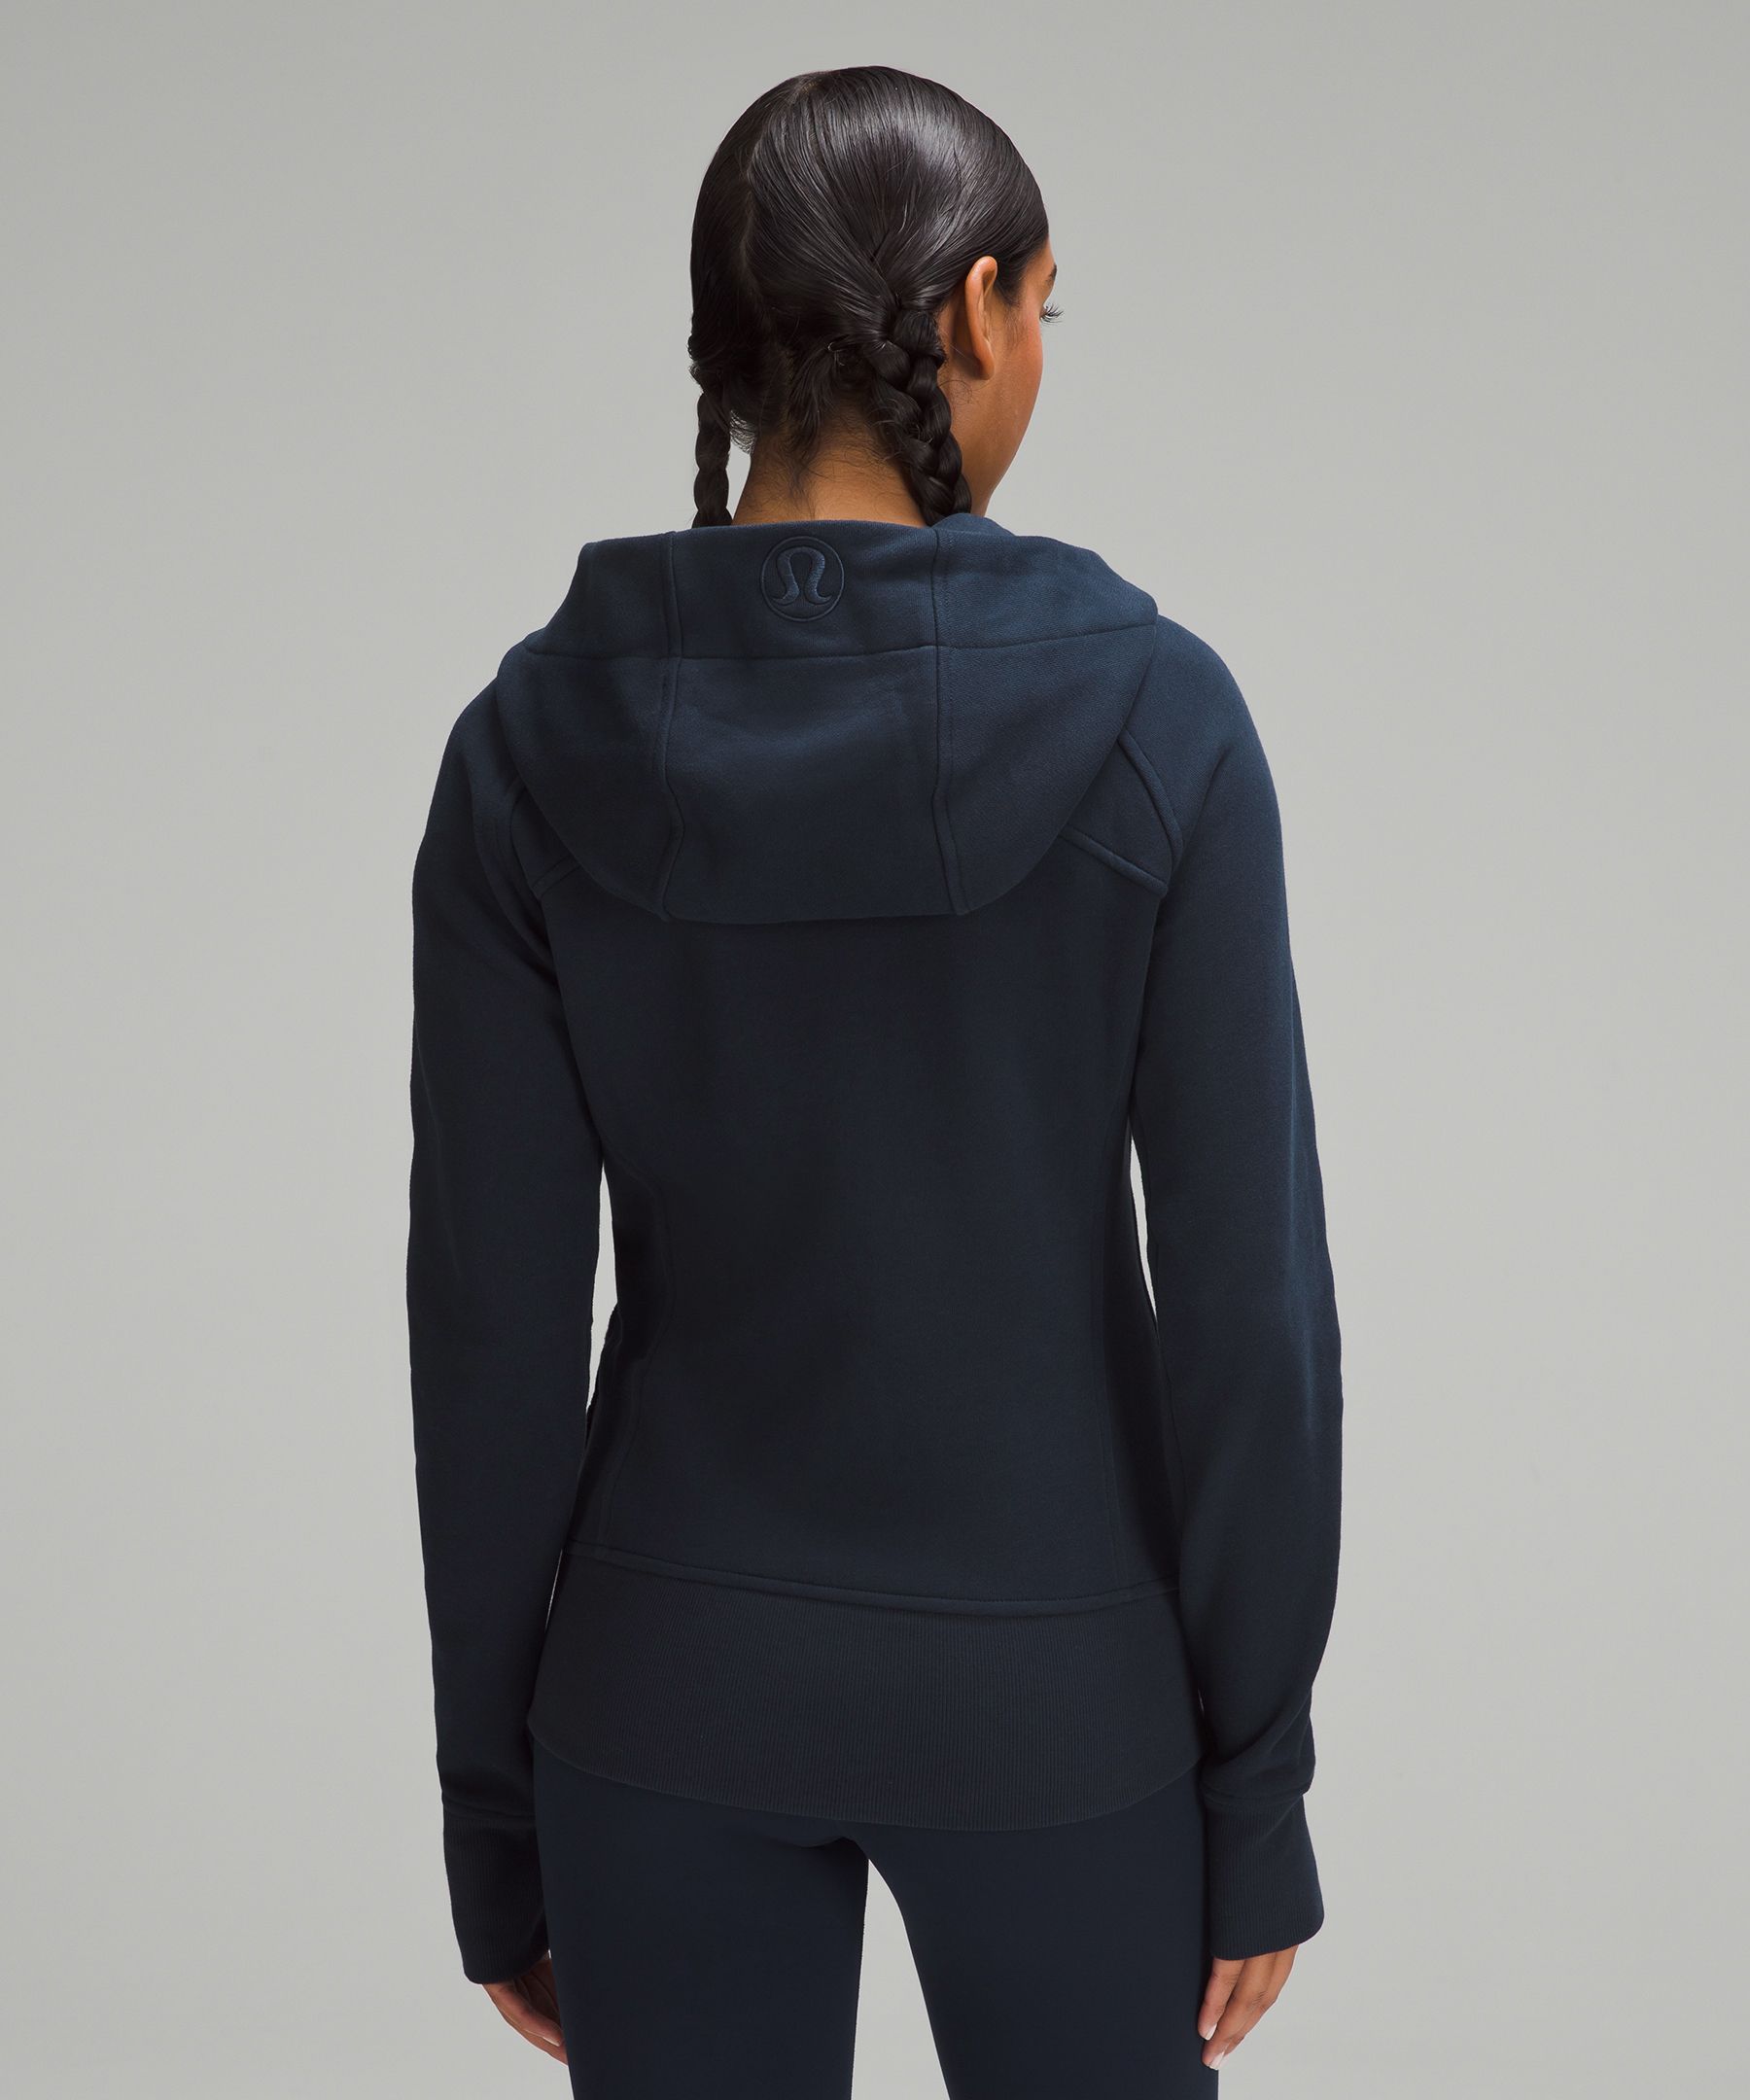 Lululemon Scuba Cropped Full Zip Hoodie Blue Size L - $70 (41% Off Retail)  - From Haley